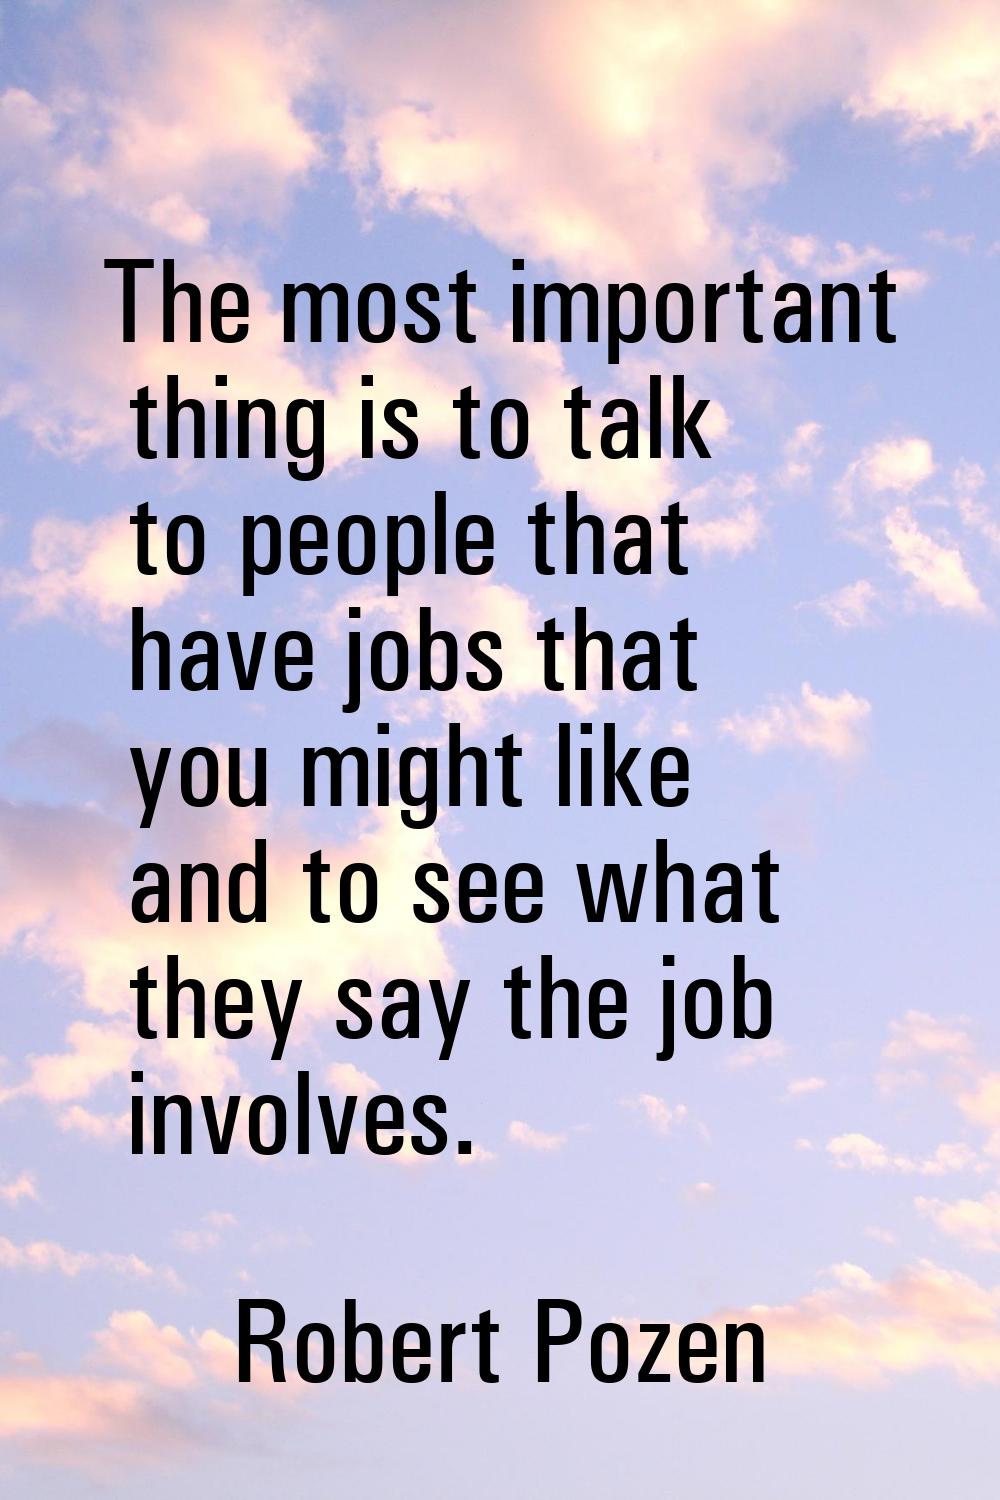 The most important thing is to talk to people that have jobs that you might like and to see what th